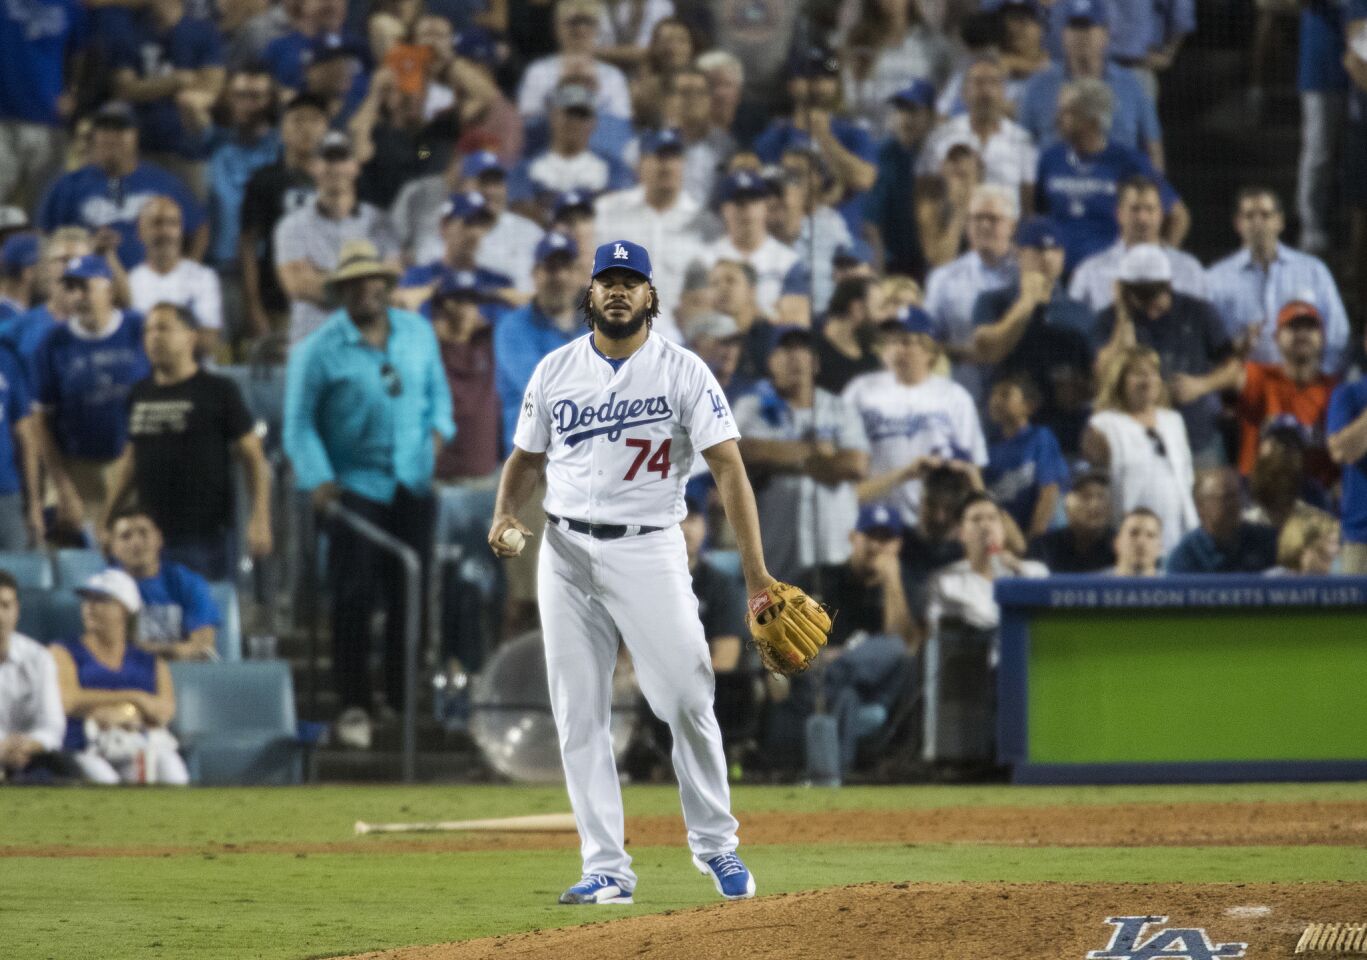 Kenley Jansen turns toward the outfield after giving up a game-tying homer to Astros left fielder Marwin Gonzalez in the ninth inning.